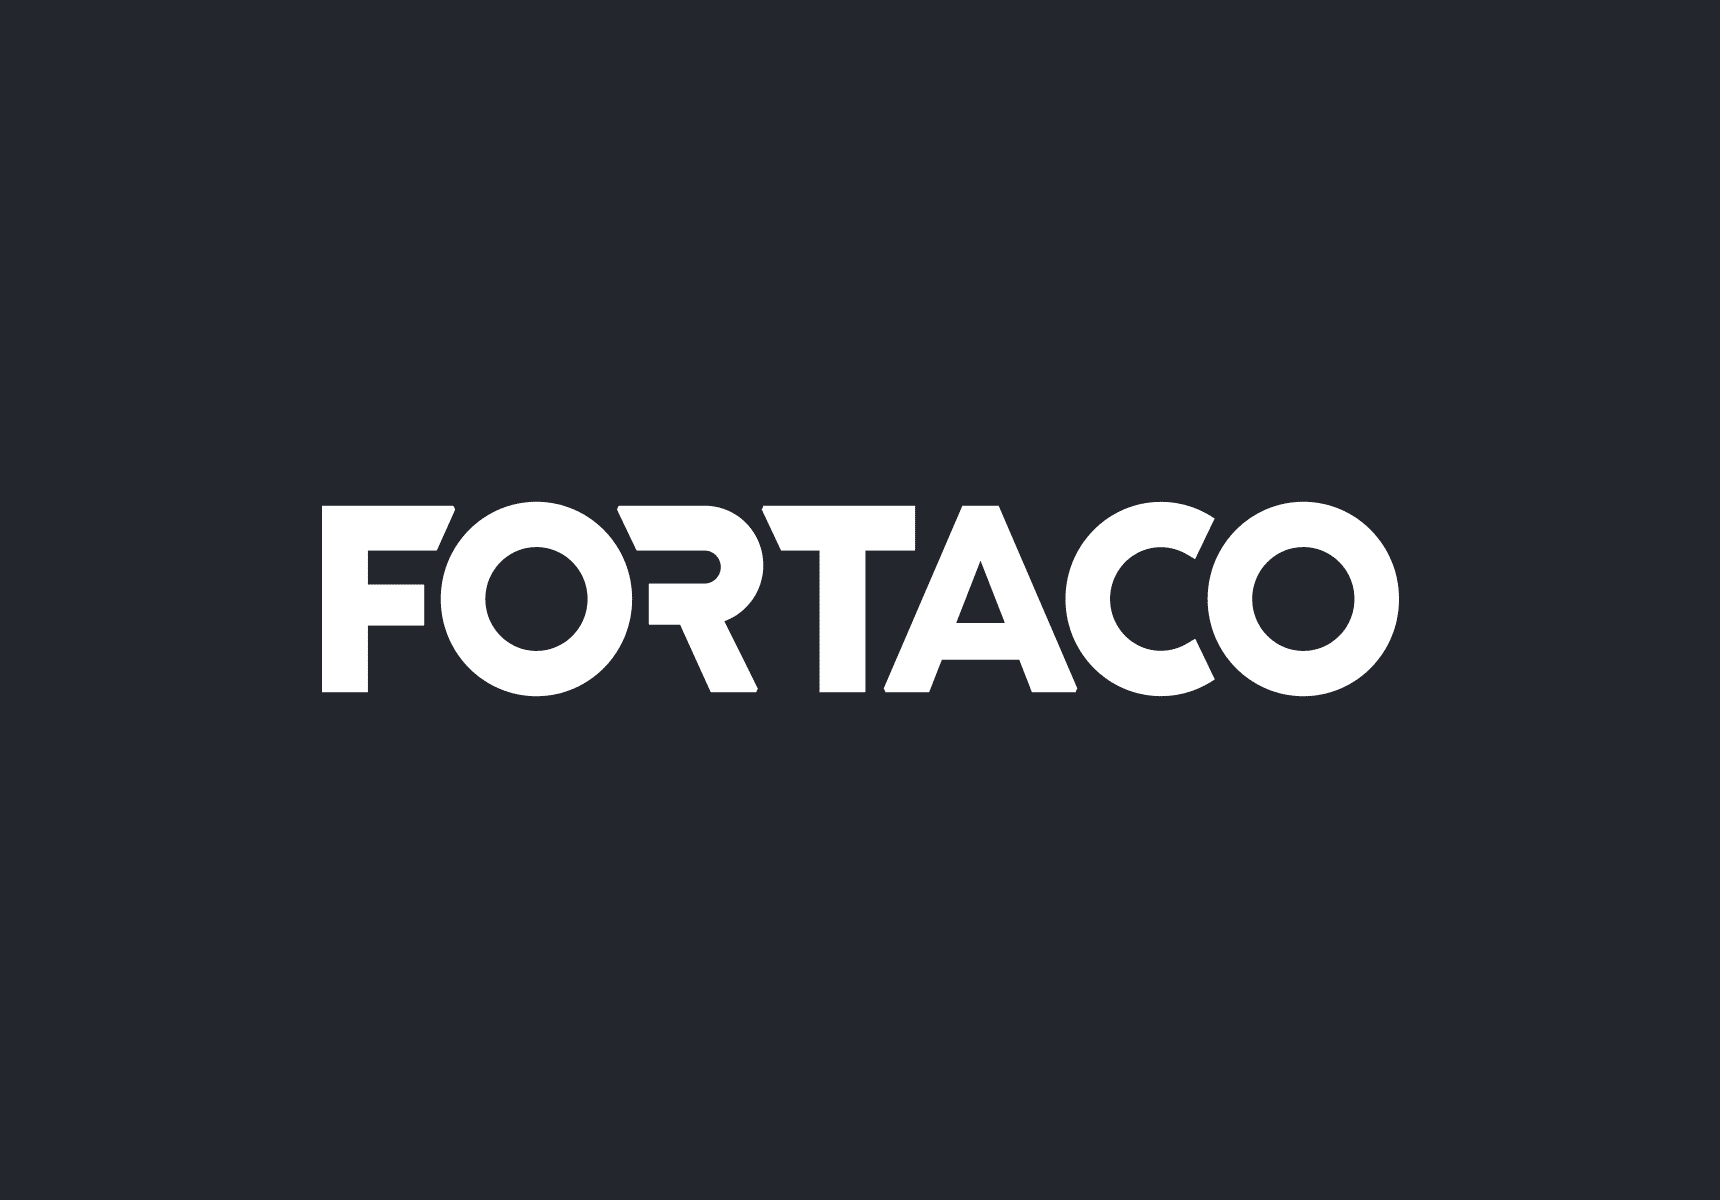 FORTACO